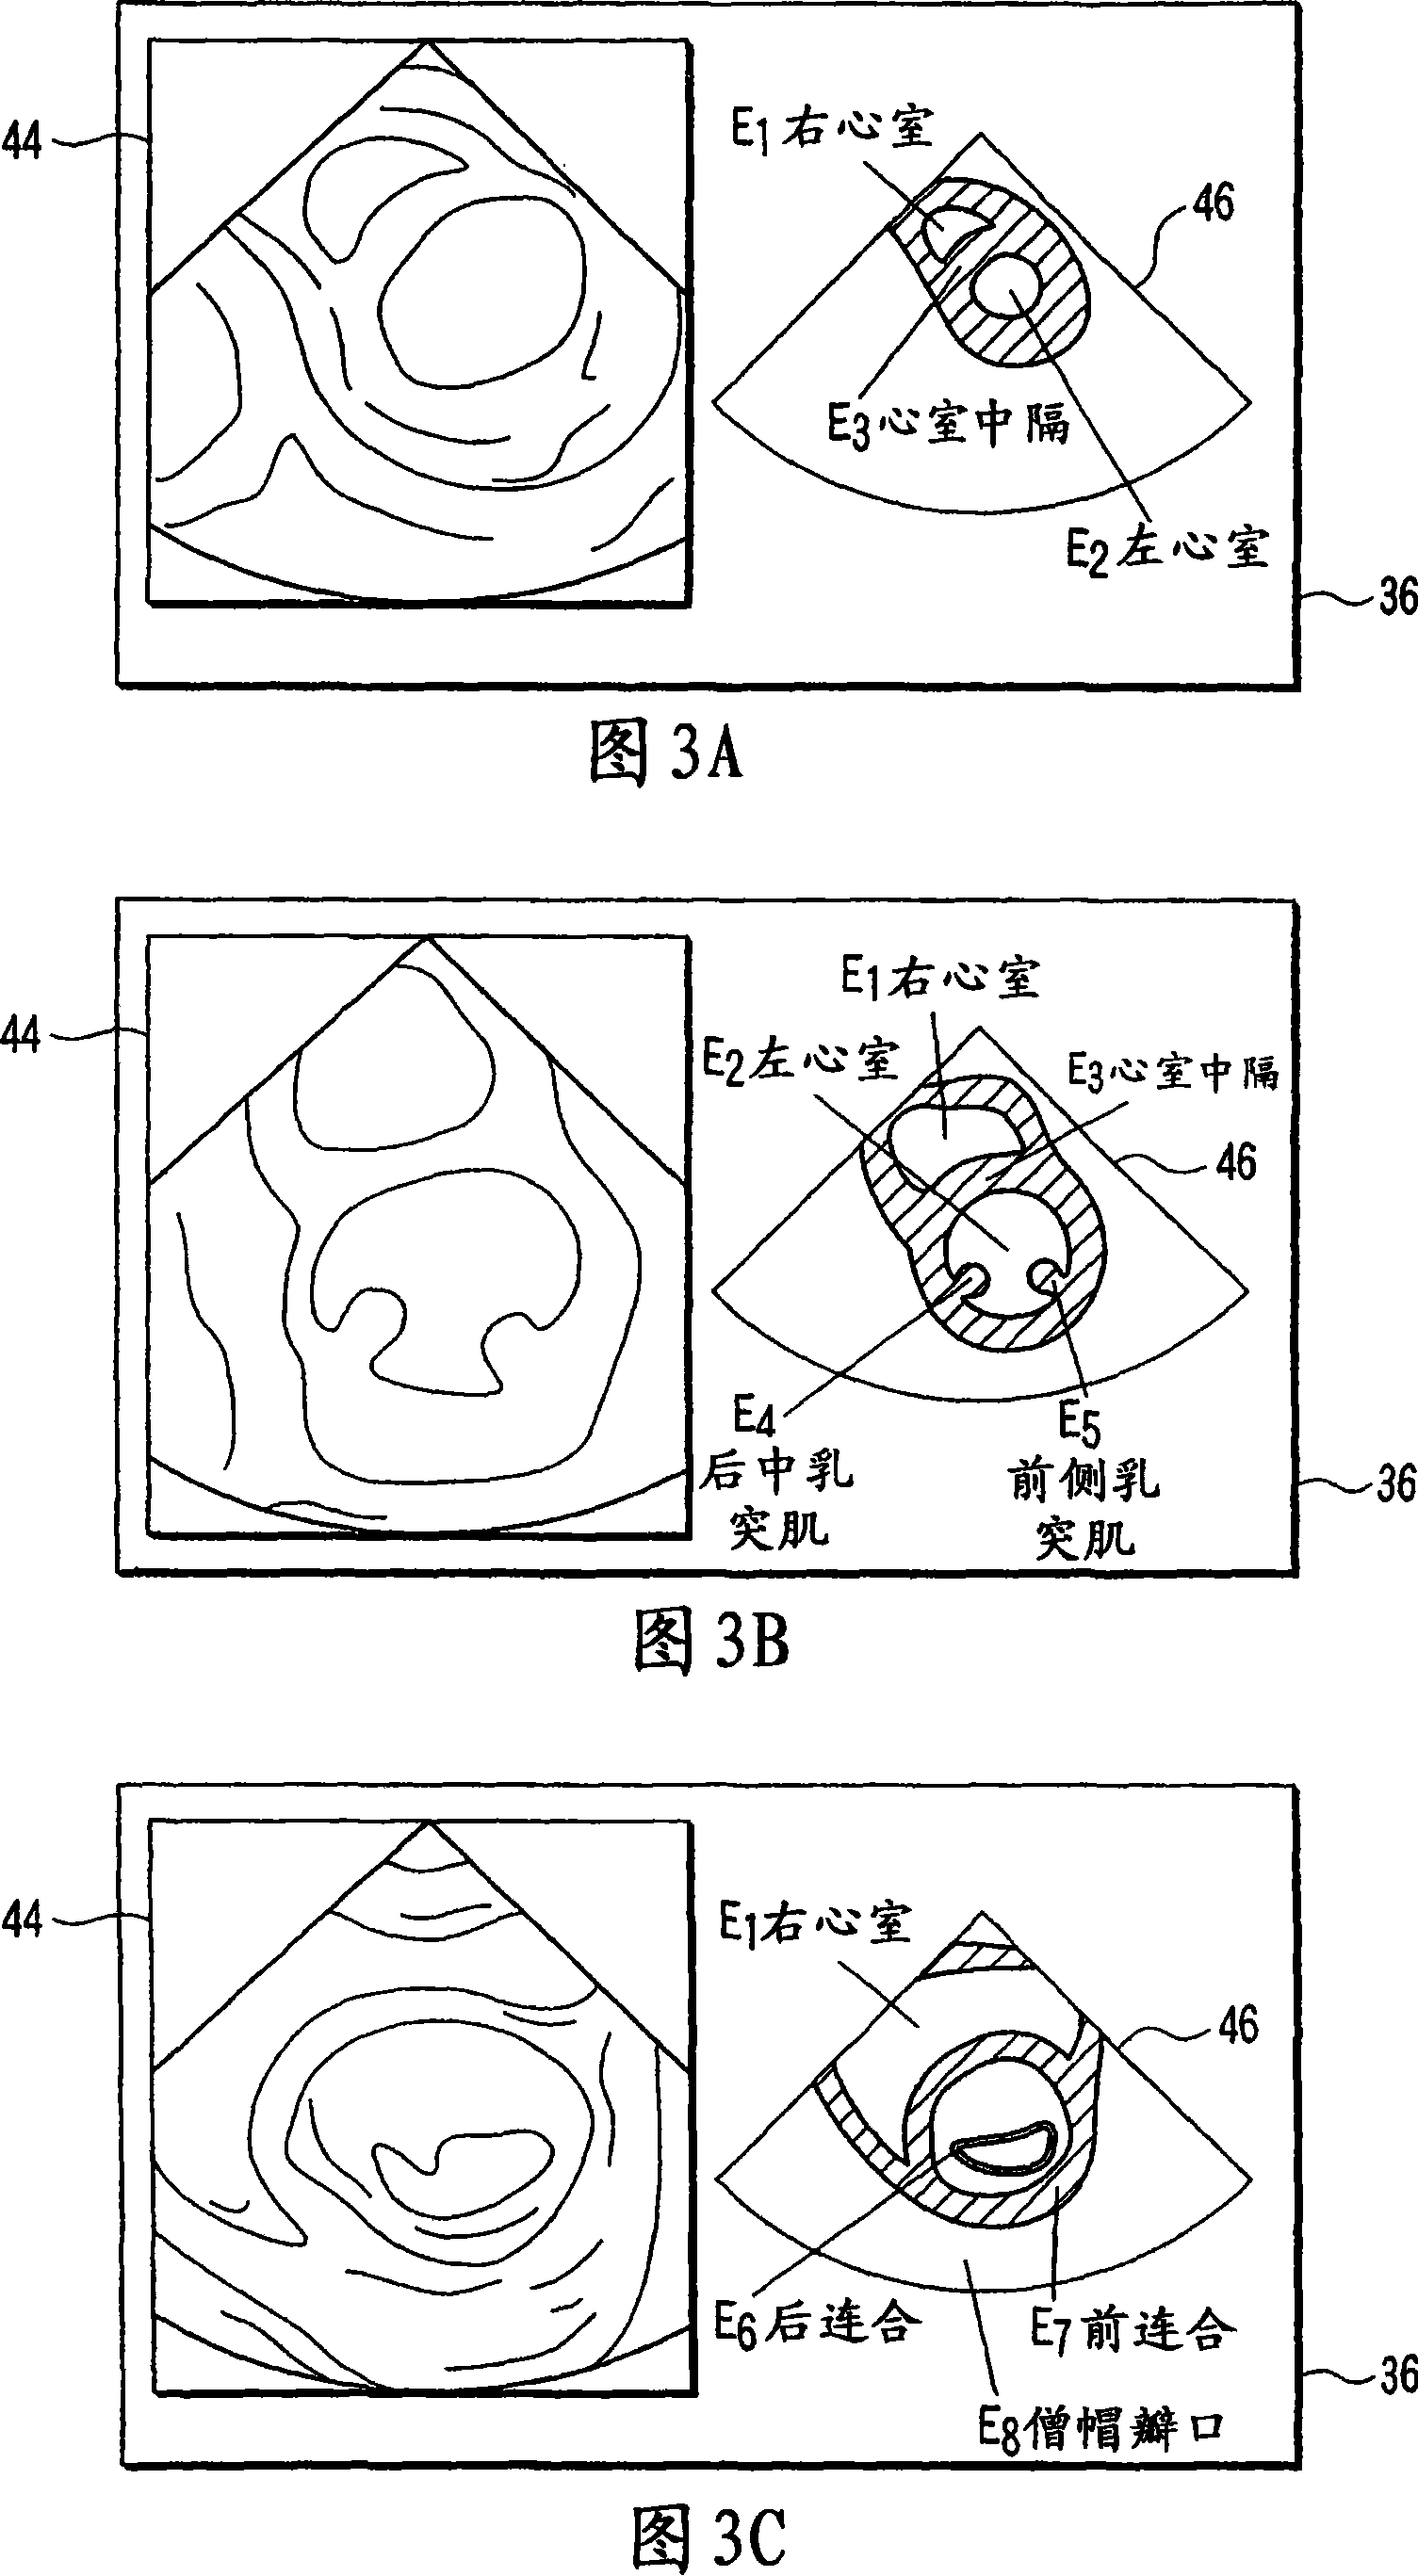 Ultrasonic diagnostic apparatus and the diagnostic method thereof